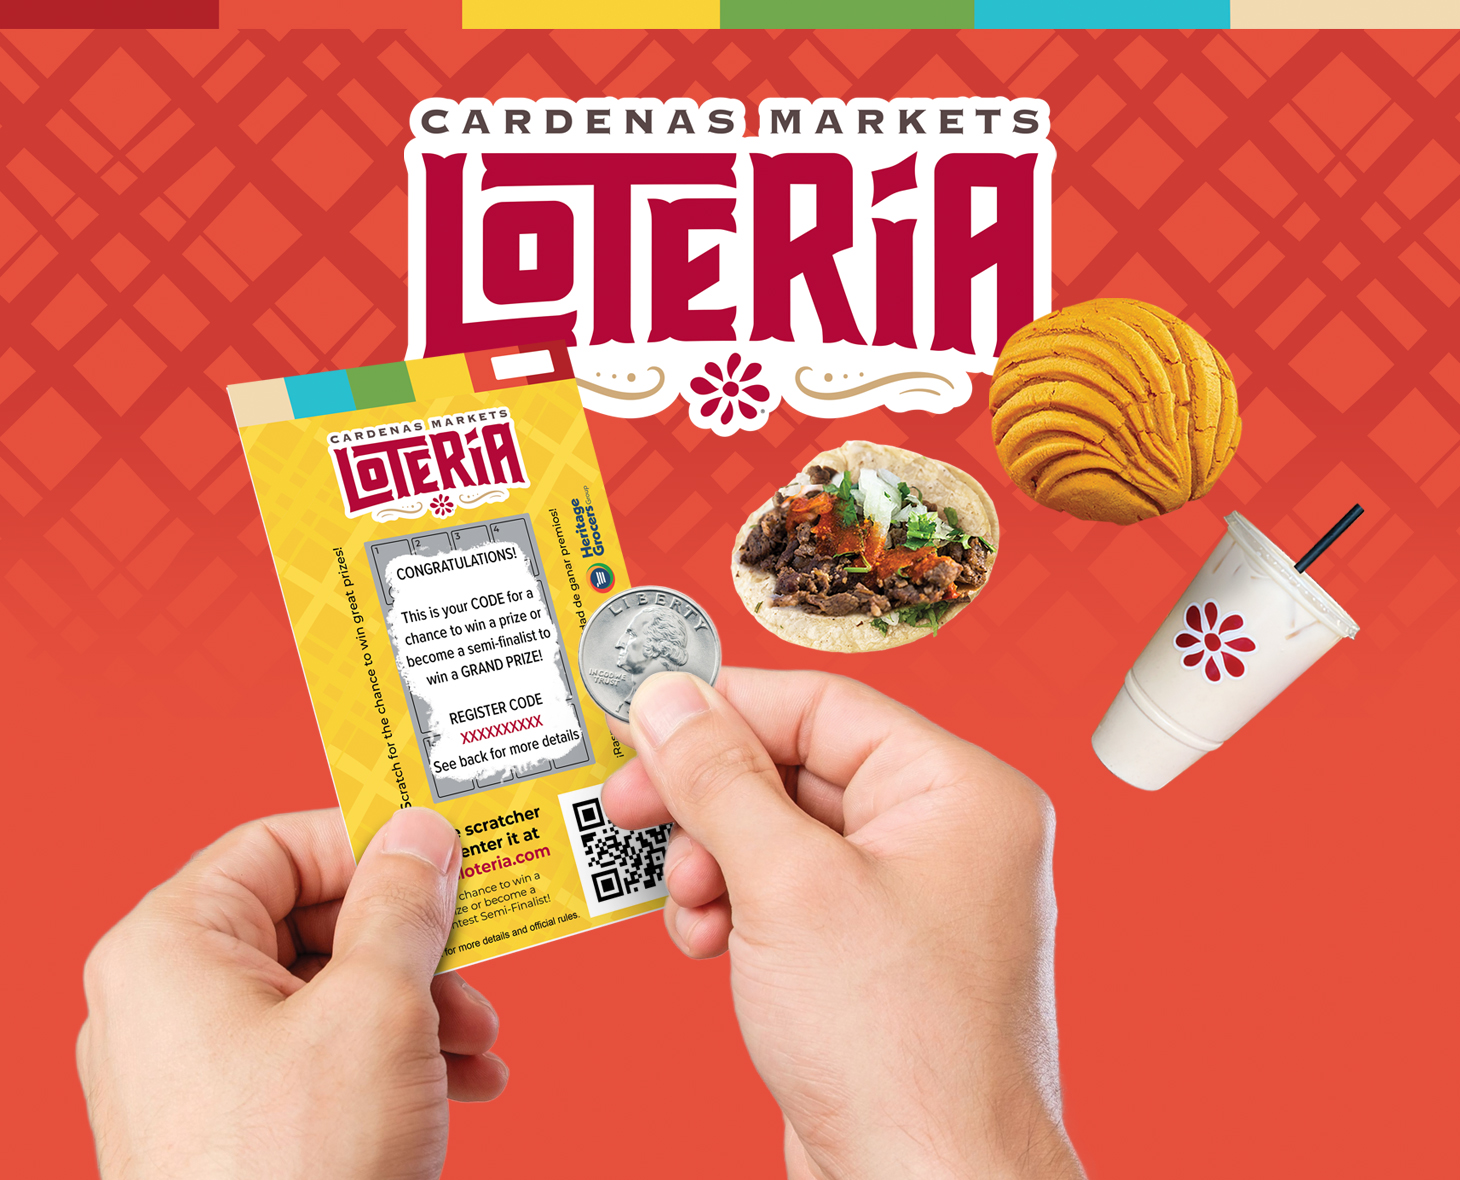 Cardenas Loteria hero image showing a scratcher and prizes floating around the scratcher with the Loteria logo in the background